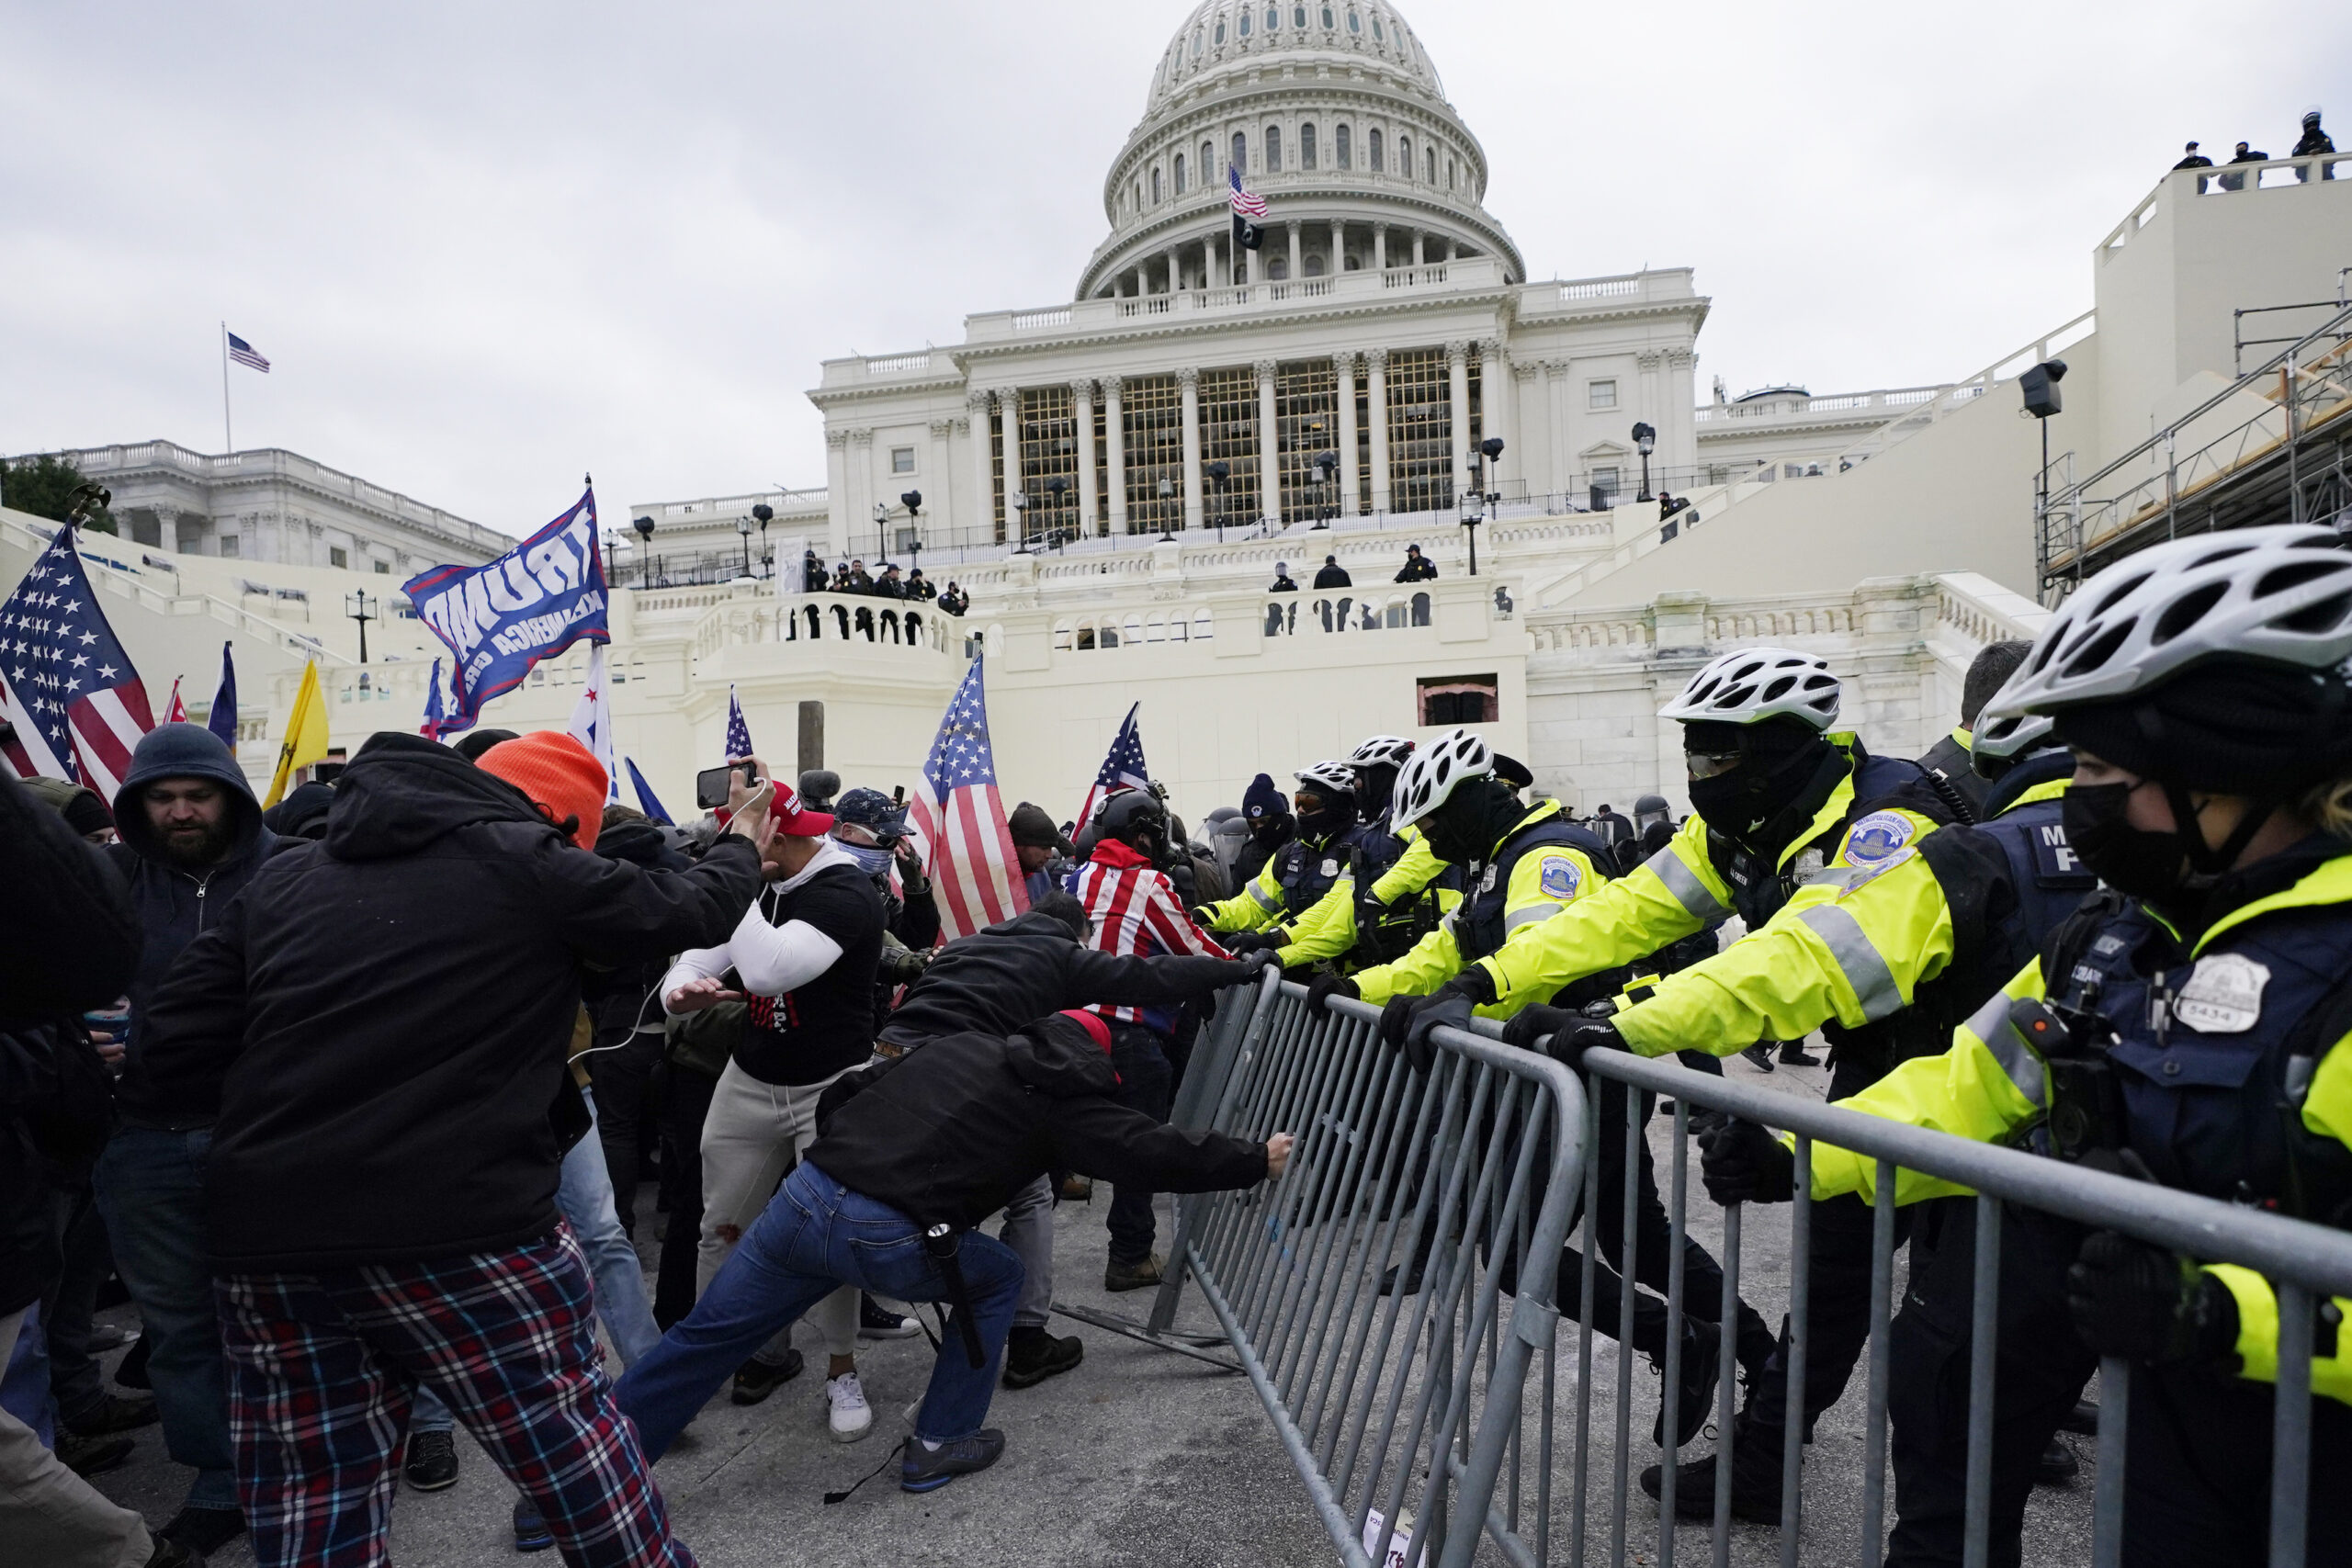 Rioters struggling with police over a barricade in front of the U.S. Capitol